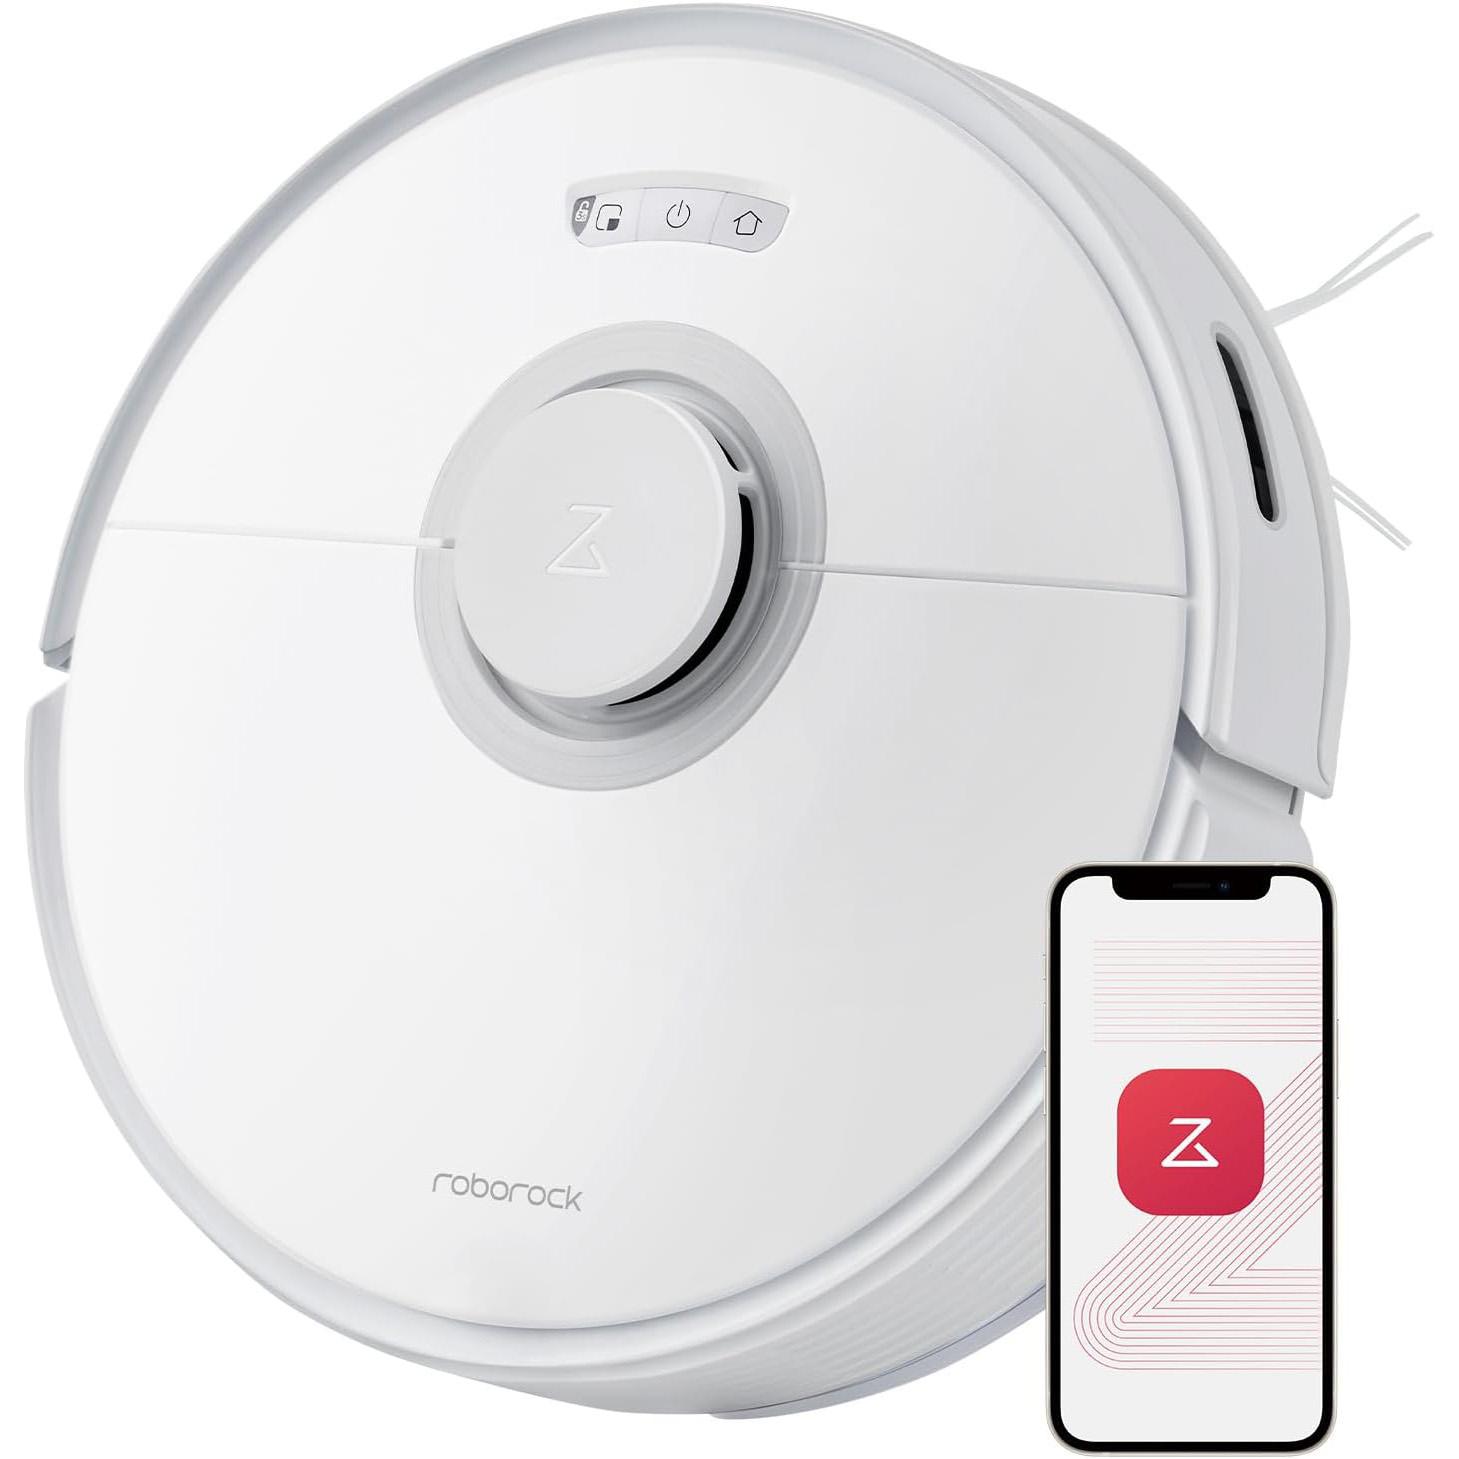 Roborock Q7 Max Robot Vacuum and Mop Cleaner for $279.99 Shipped